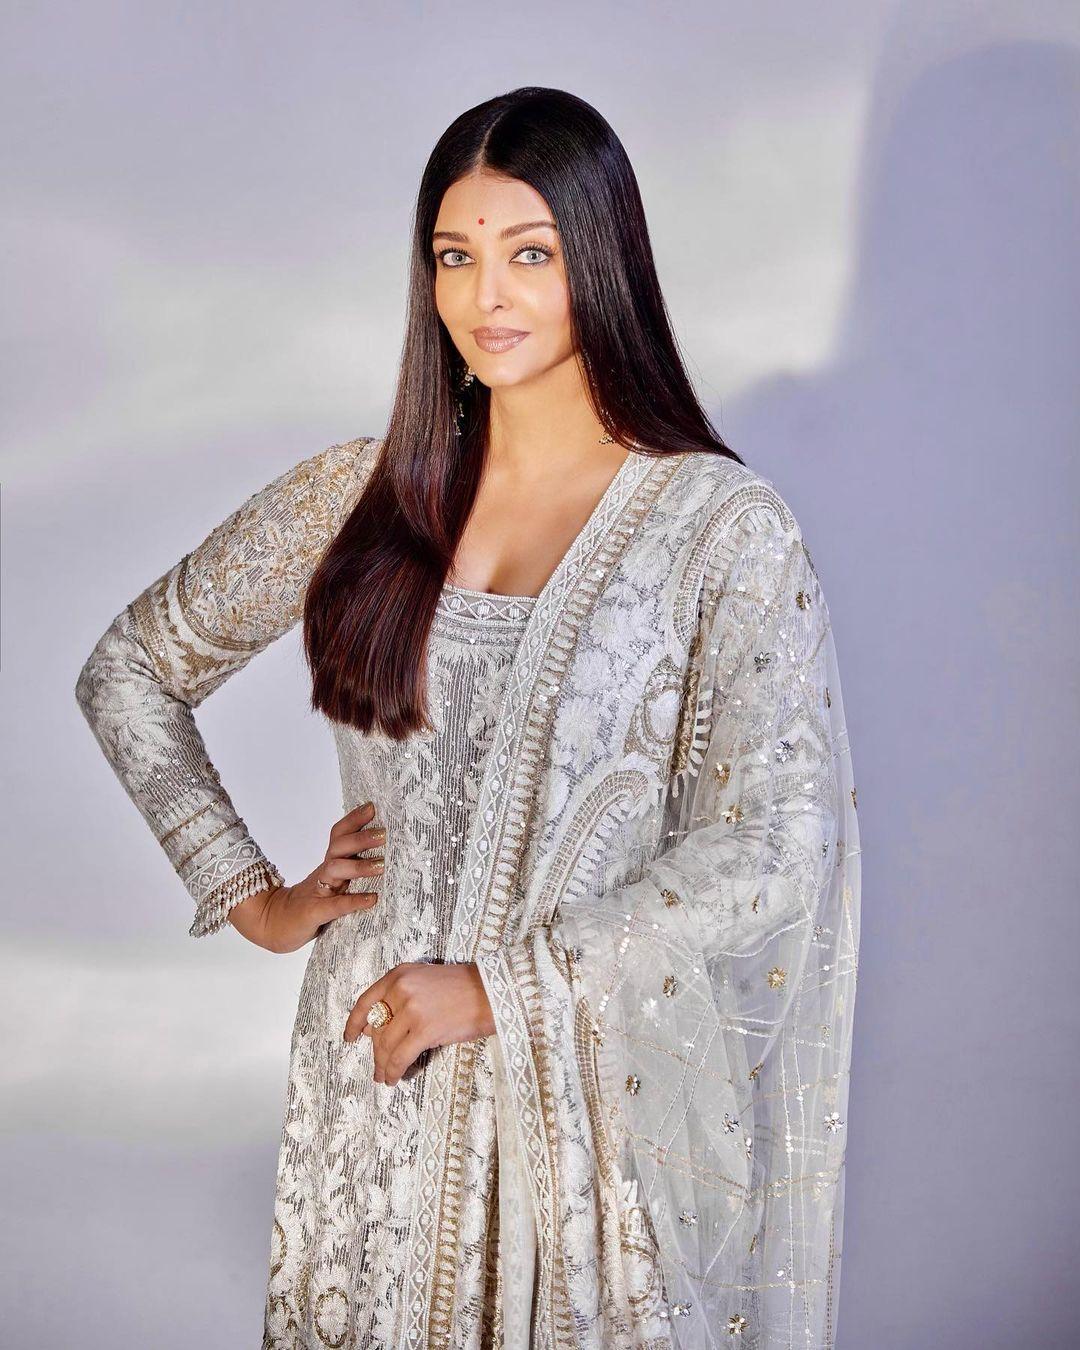 Sharing a series of captivating snapshots on her Instagram account, Aishwarya Rai unveiled a recent photo shoot that was nothing short of mesmerizing